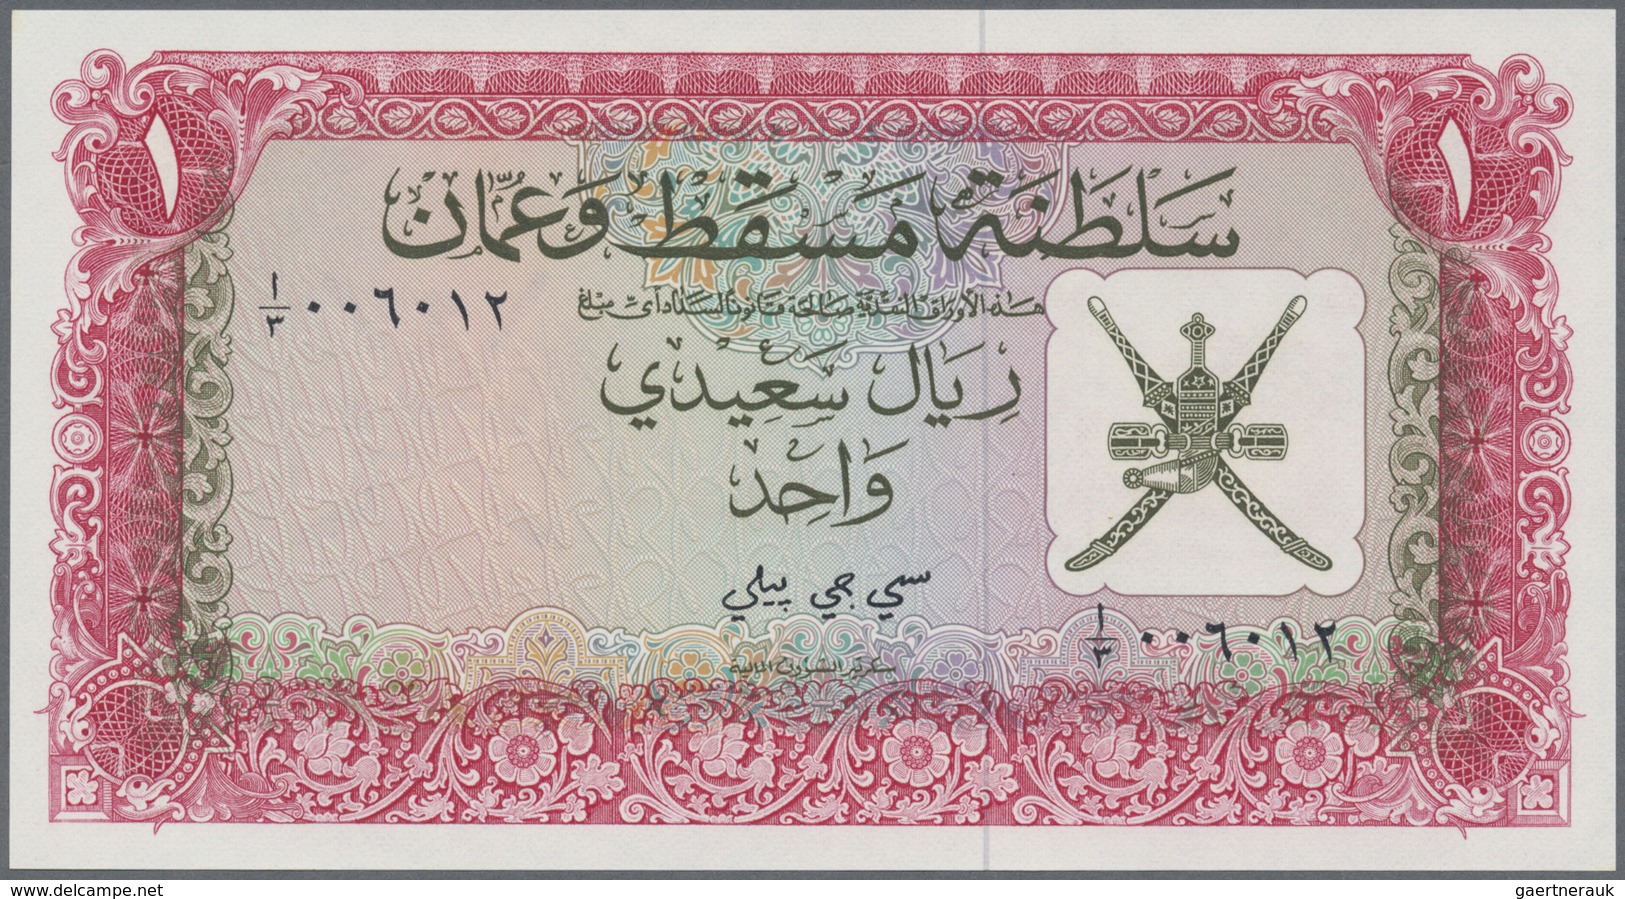 Oman: Sulatanate of Muscat and Oman, set with 6 Banknotes comprising 100 Baiza, 1/4, 1/2, 1, 5 and 1